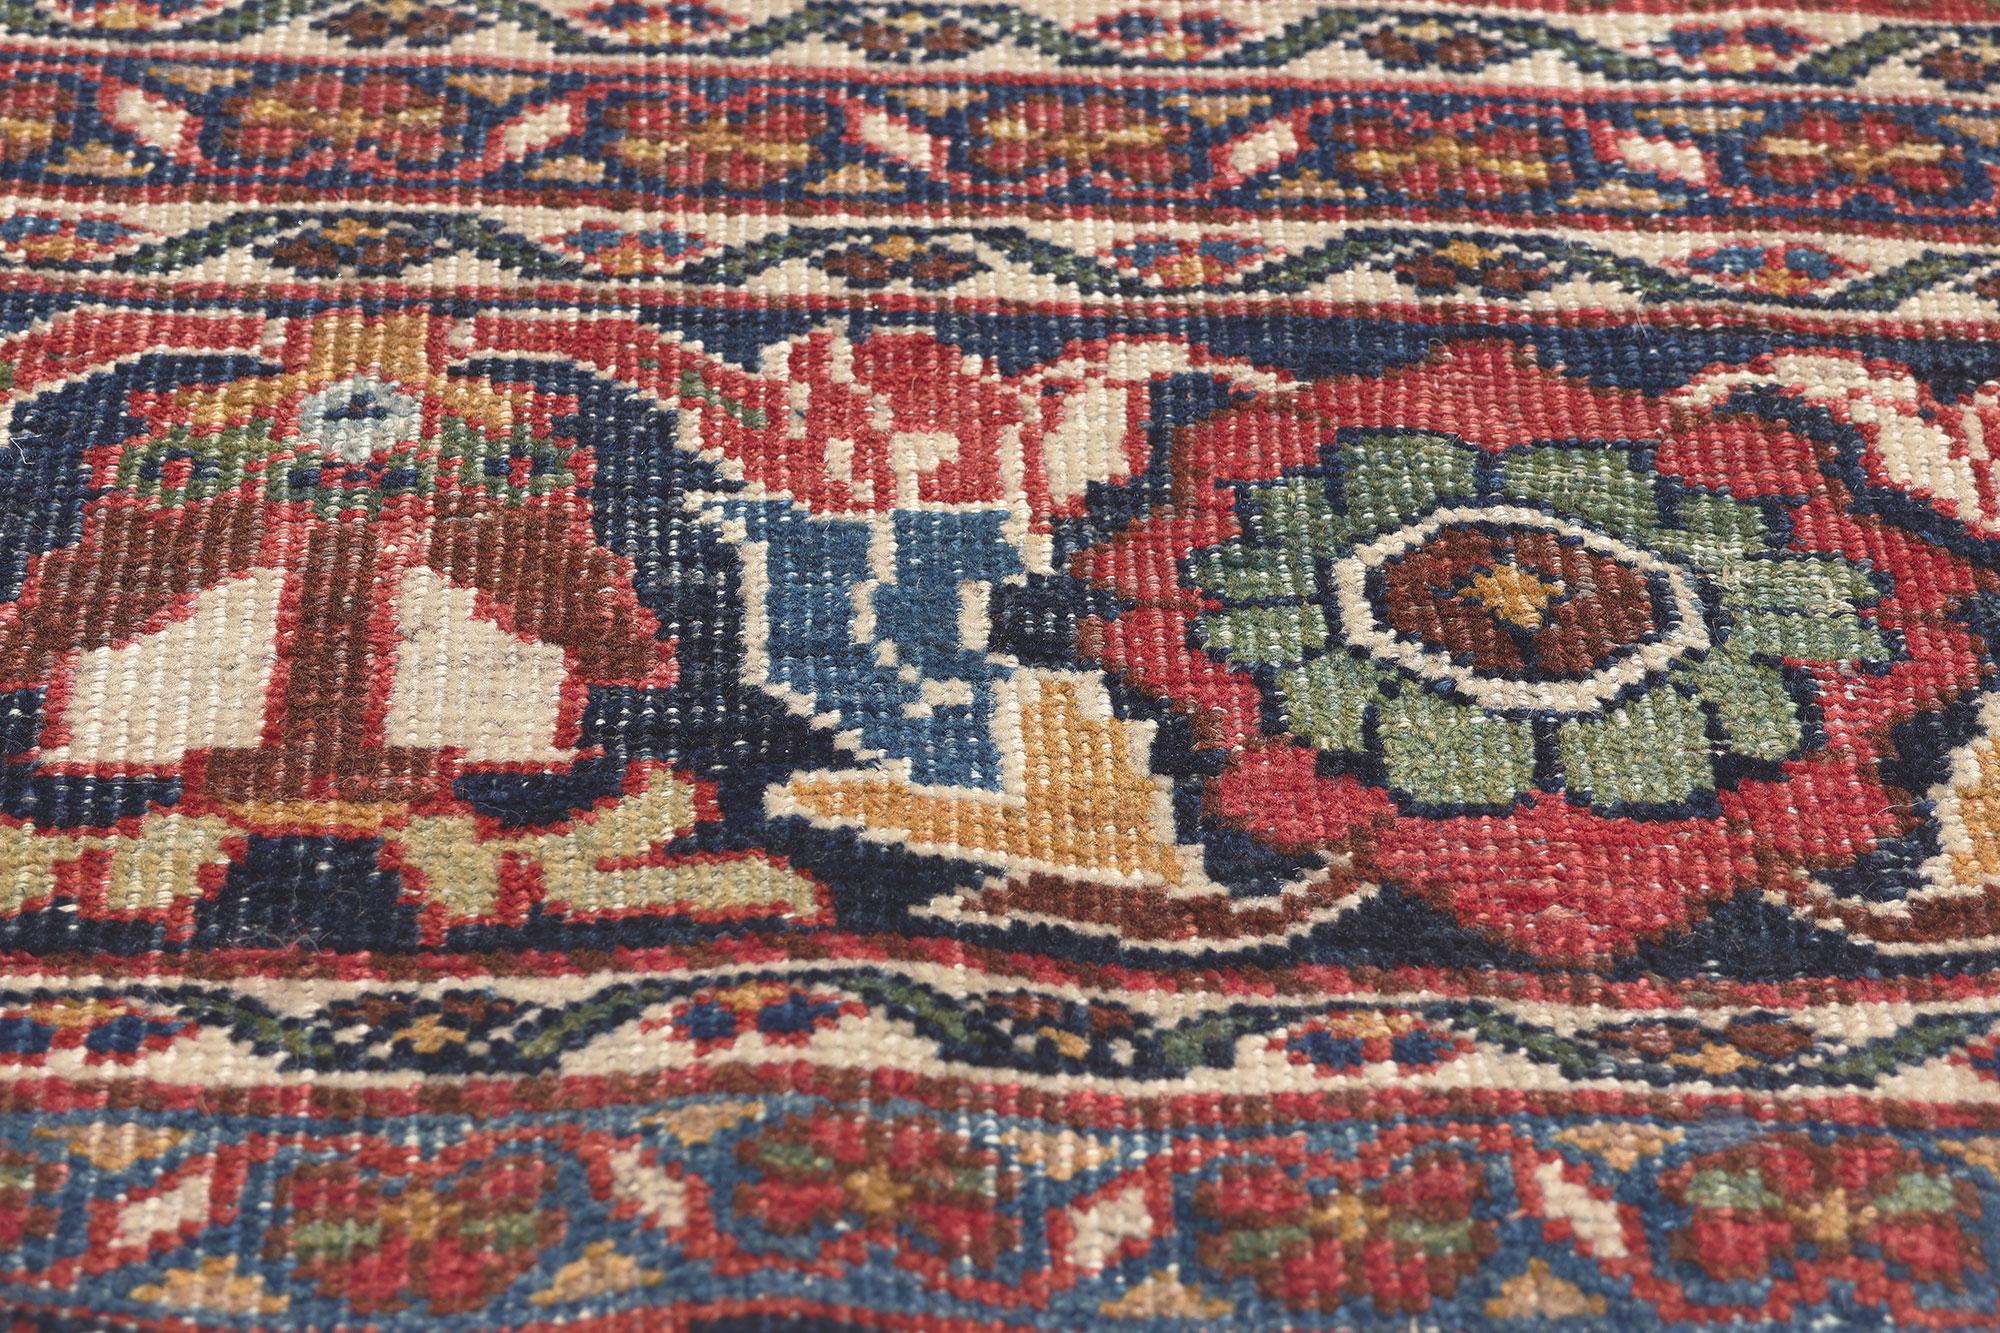 Antique Persian Mahal Rug, Ivy League Style Meets Relaxed Refinement In Good Condition For Sale In Dallas, TX